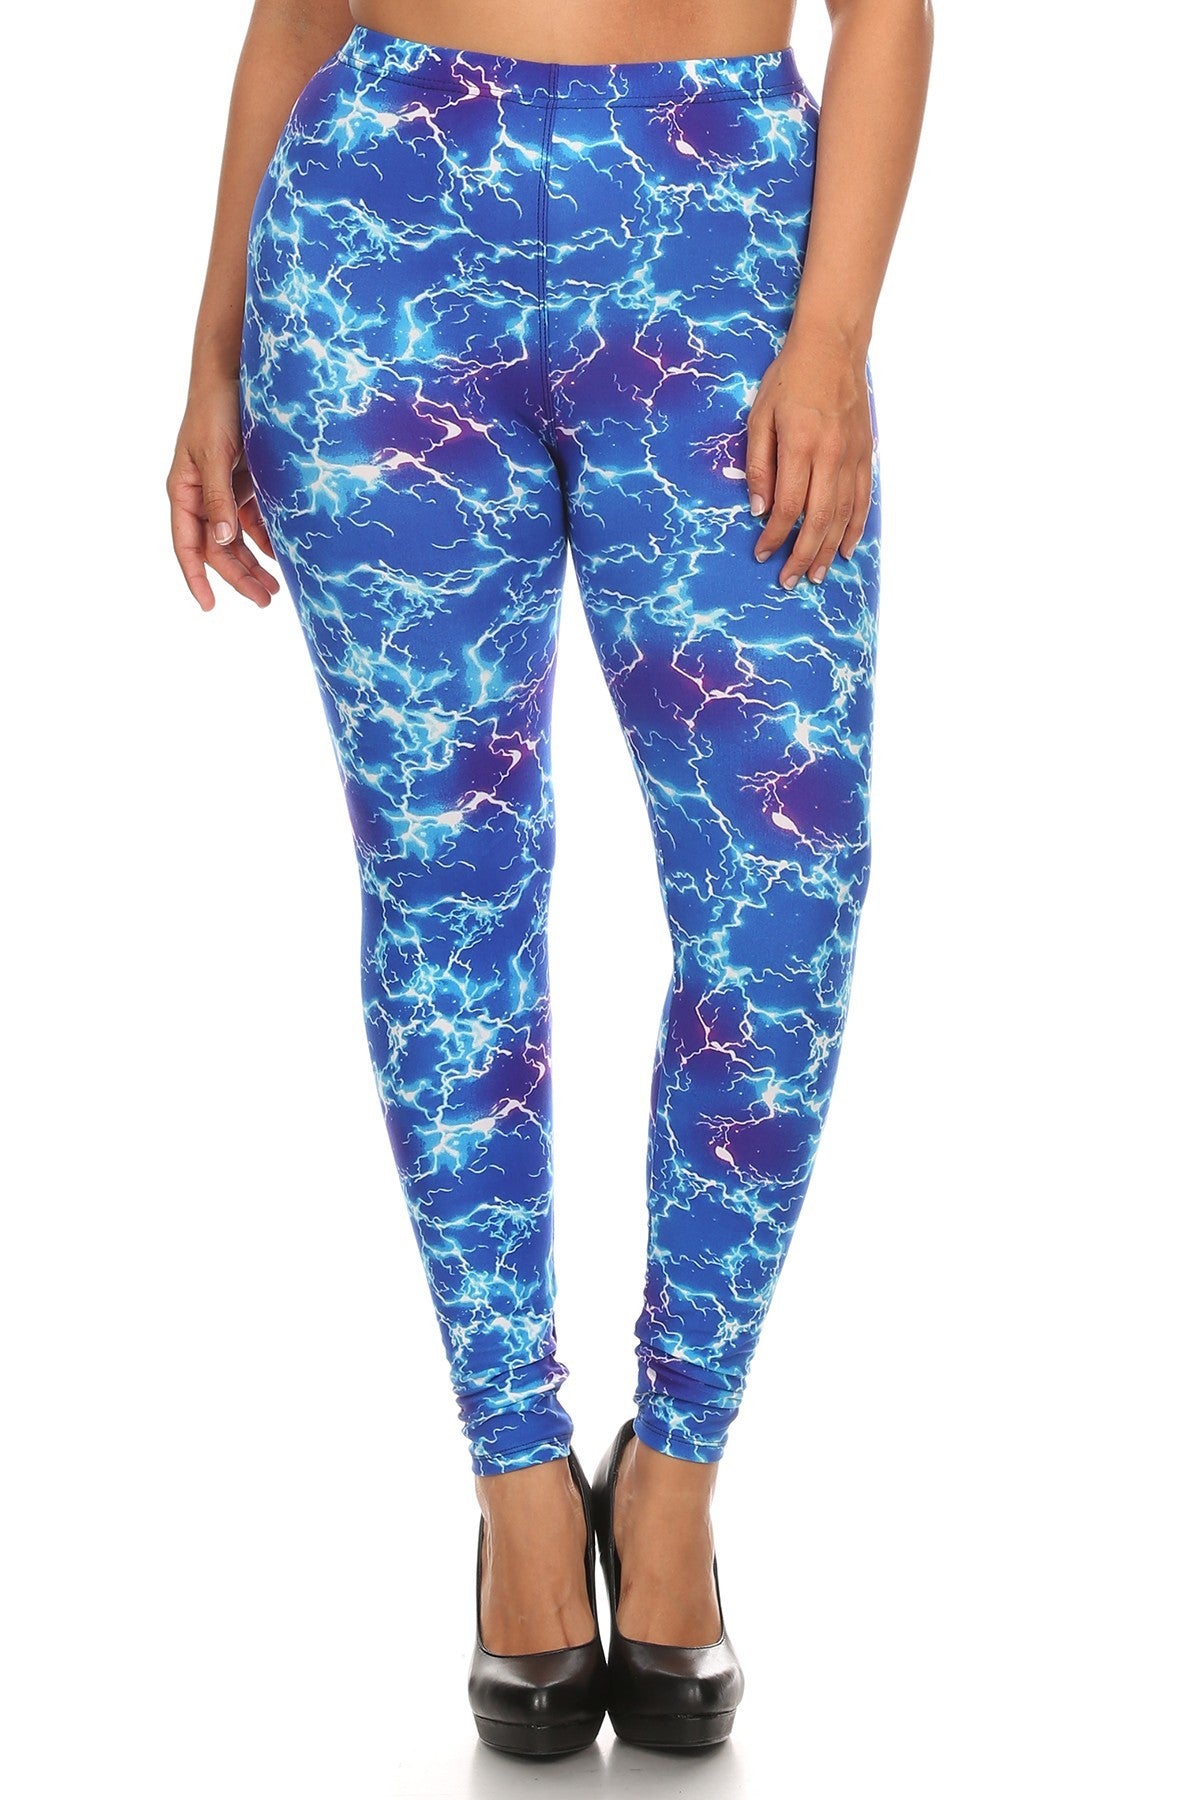 MULTI ONE SIZE FITS MOST - Plus Size Lightning Bolt Print Banded High Waist Leggings - Ships from The USA - womens leggings at TFC&H Co.